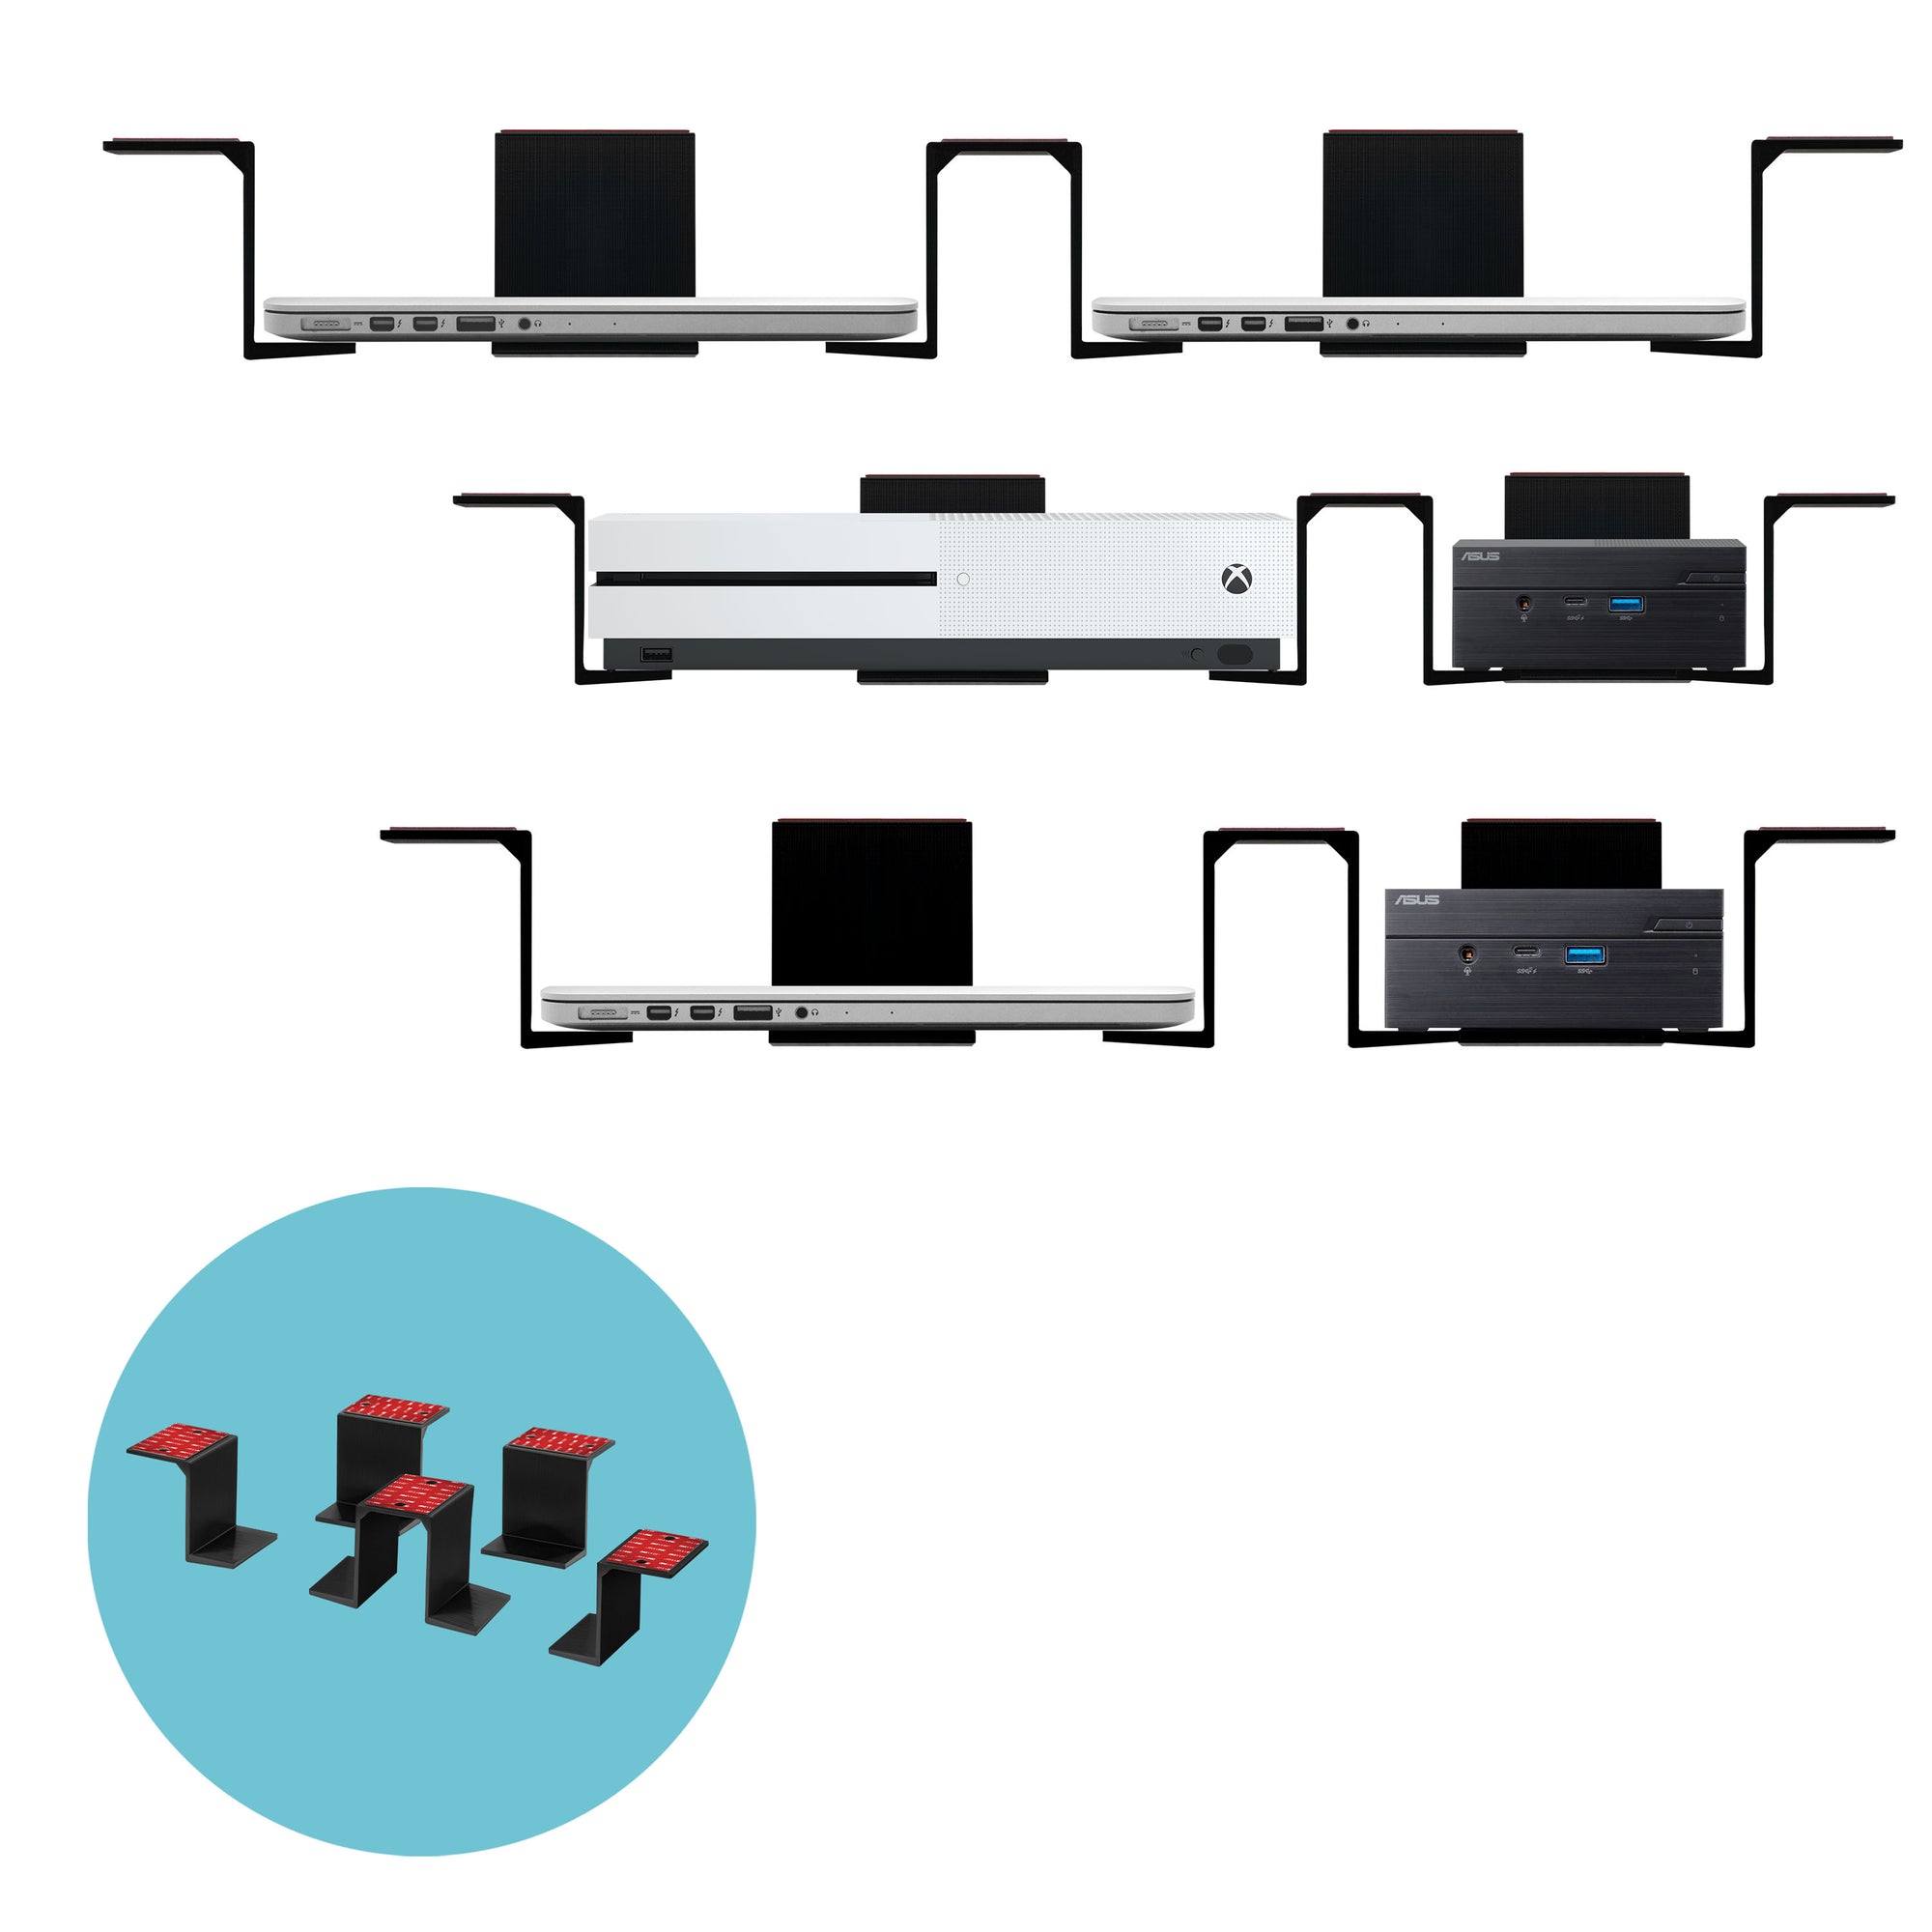 Twin Under Desk Laptop & Device Holder Mount, Adhesive & Screw In, Devices upto 3" Like Small Computers Laptops Macbook Surface Keyboard Routers Modems Cable Box Network Switch & More